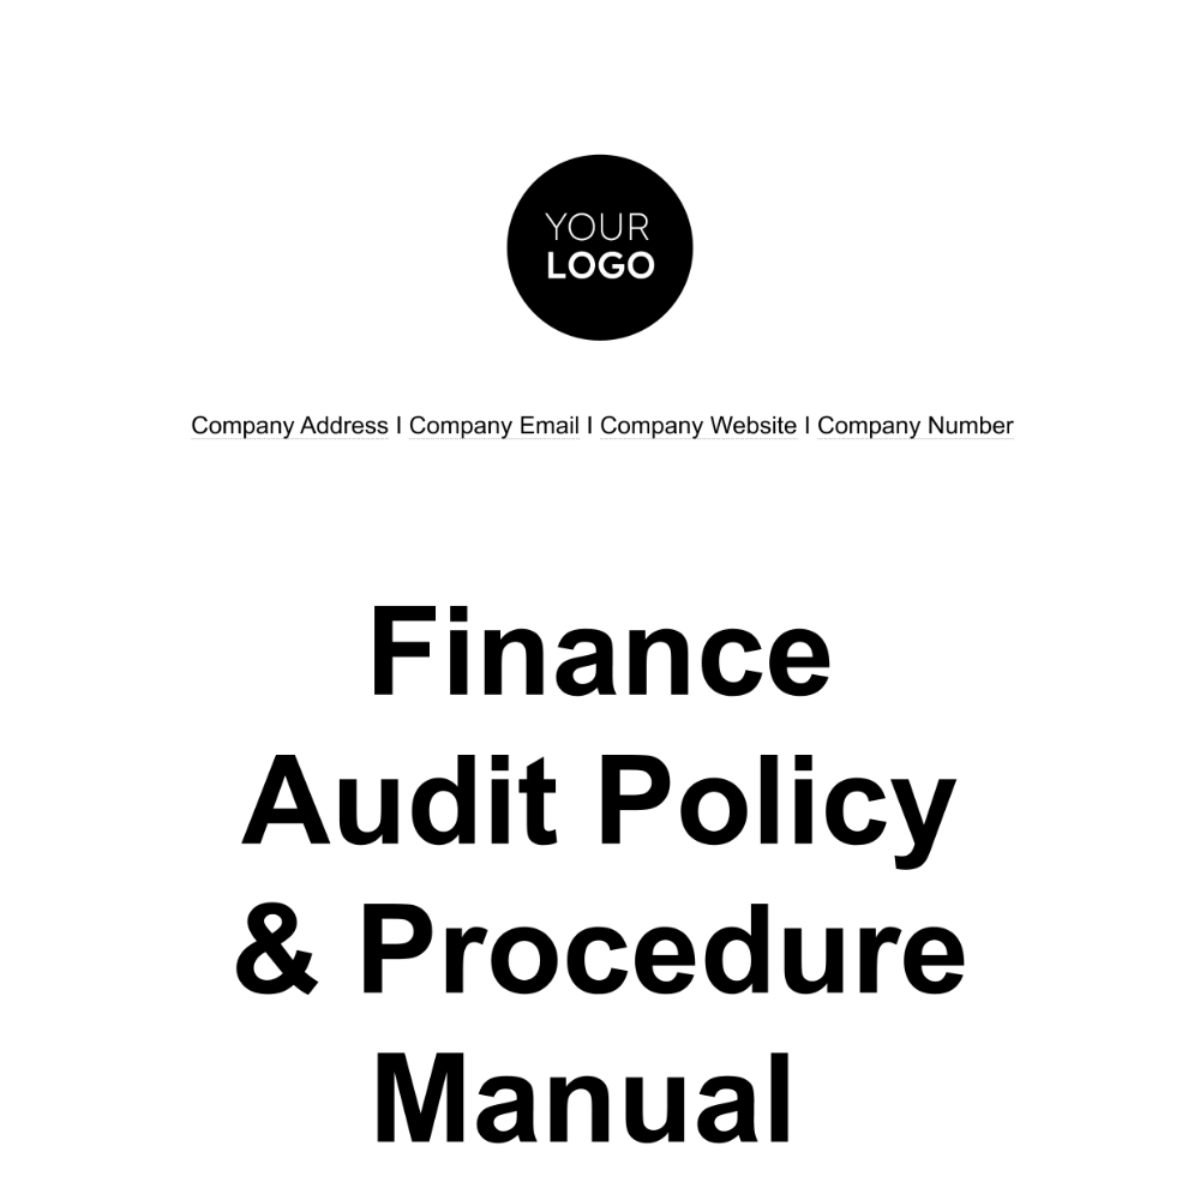 Finance Audit Policy & Procedure Manual Template